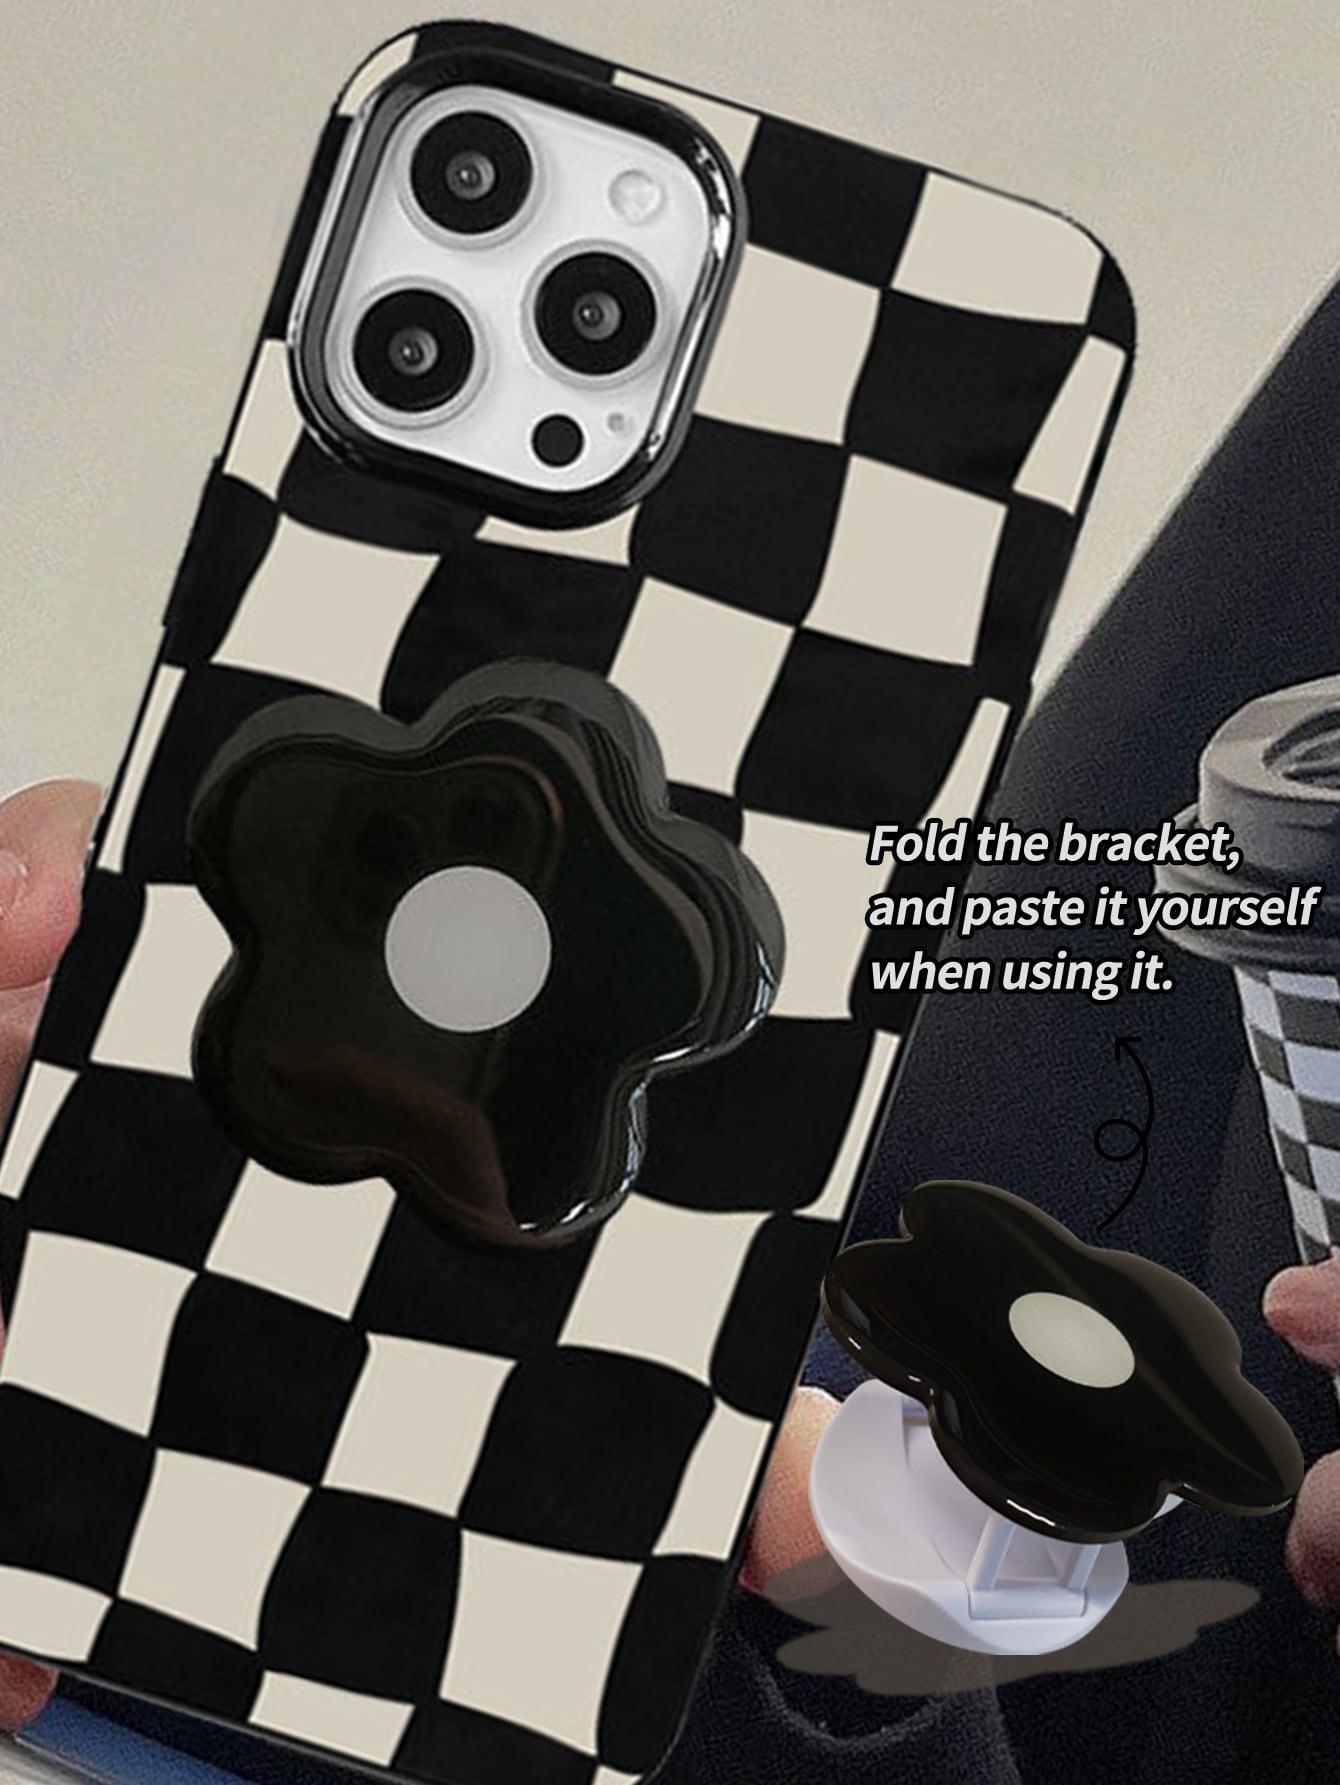 Checkered Phone Case With Flower Stand-Out Phone Grip for iPhone 14 14 pro 14 Pro Max iPhone 13 iPhone 12 - Decotree.co Online Shop